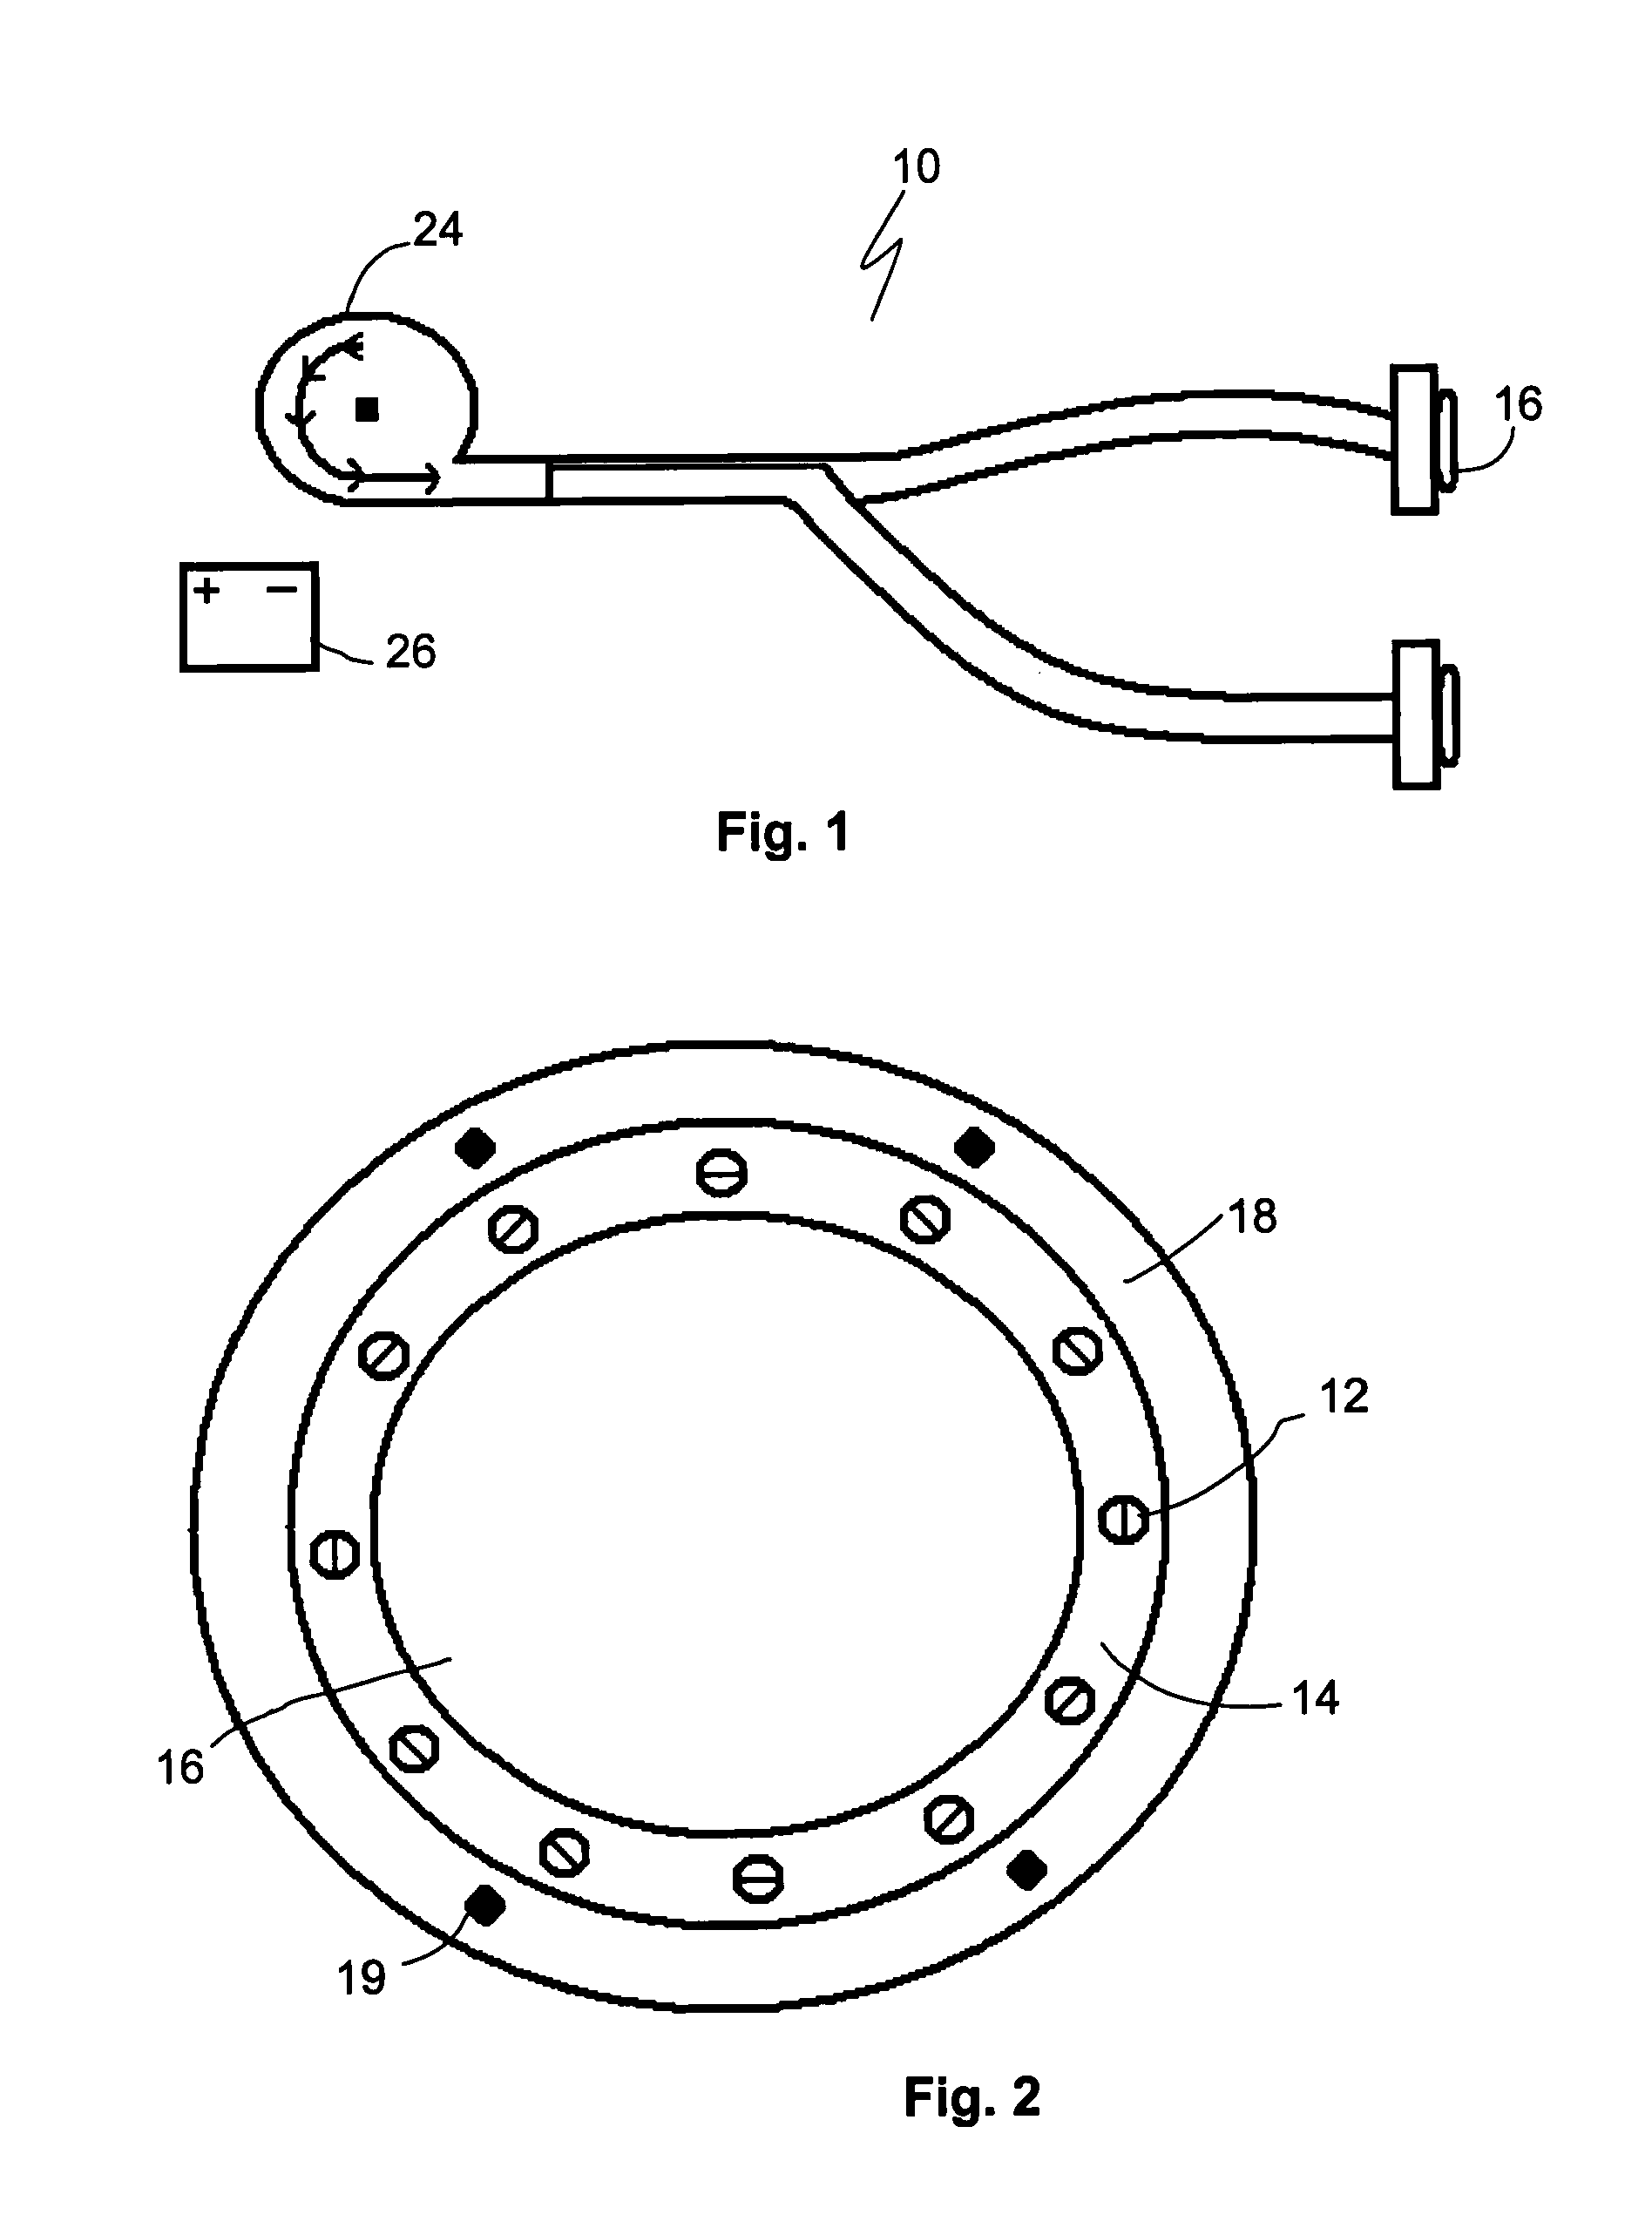 Method and apparatus for preventing a build up of snow or dust